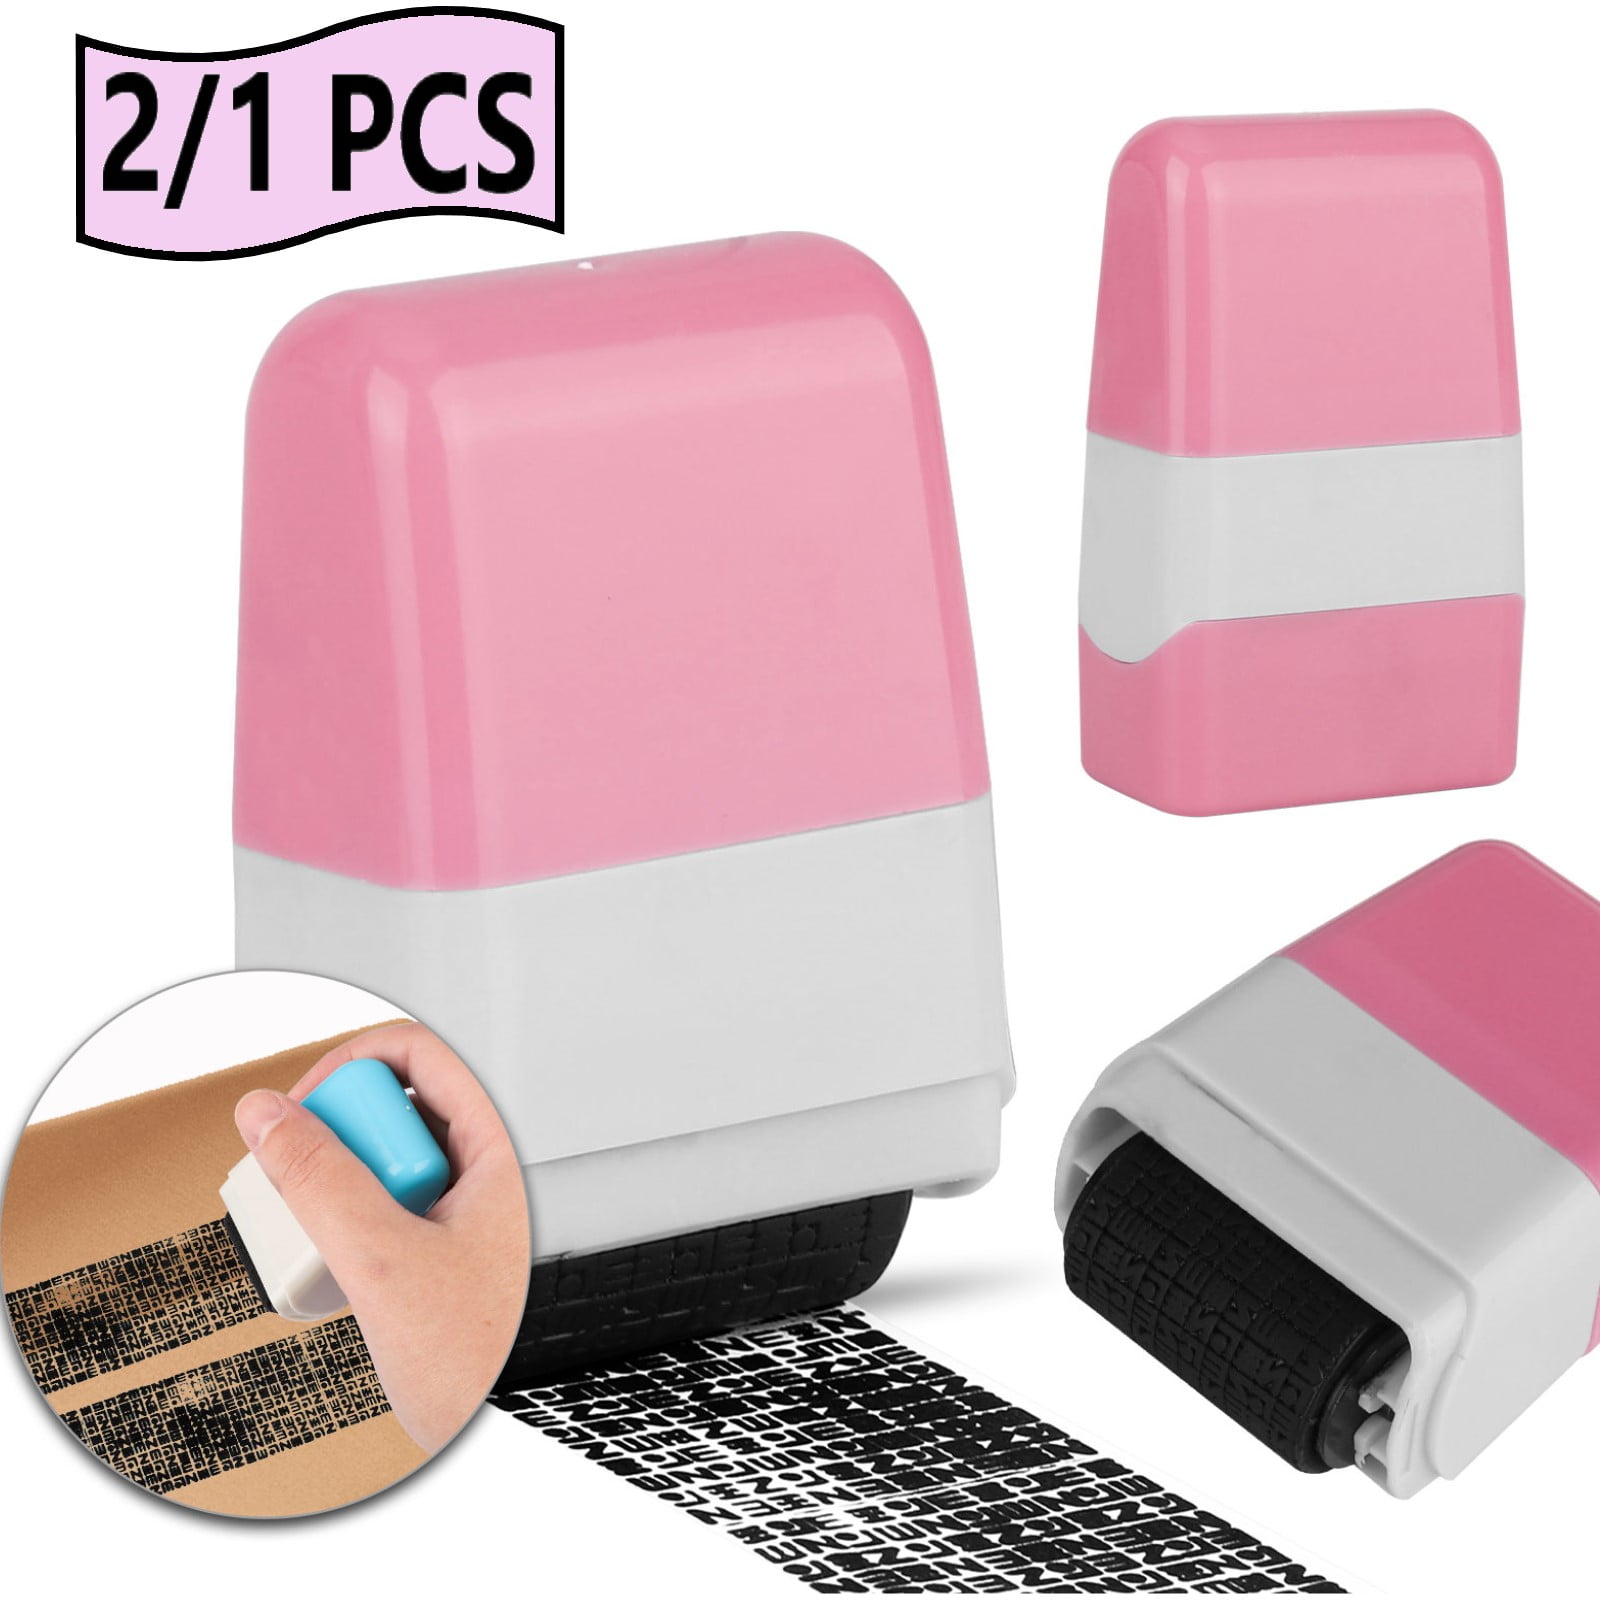 ERASE IT RUBBER STAMP SELF INKING SECURITY SHREDDER NO NEED ID MARKER PROTECTOR 